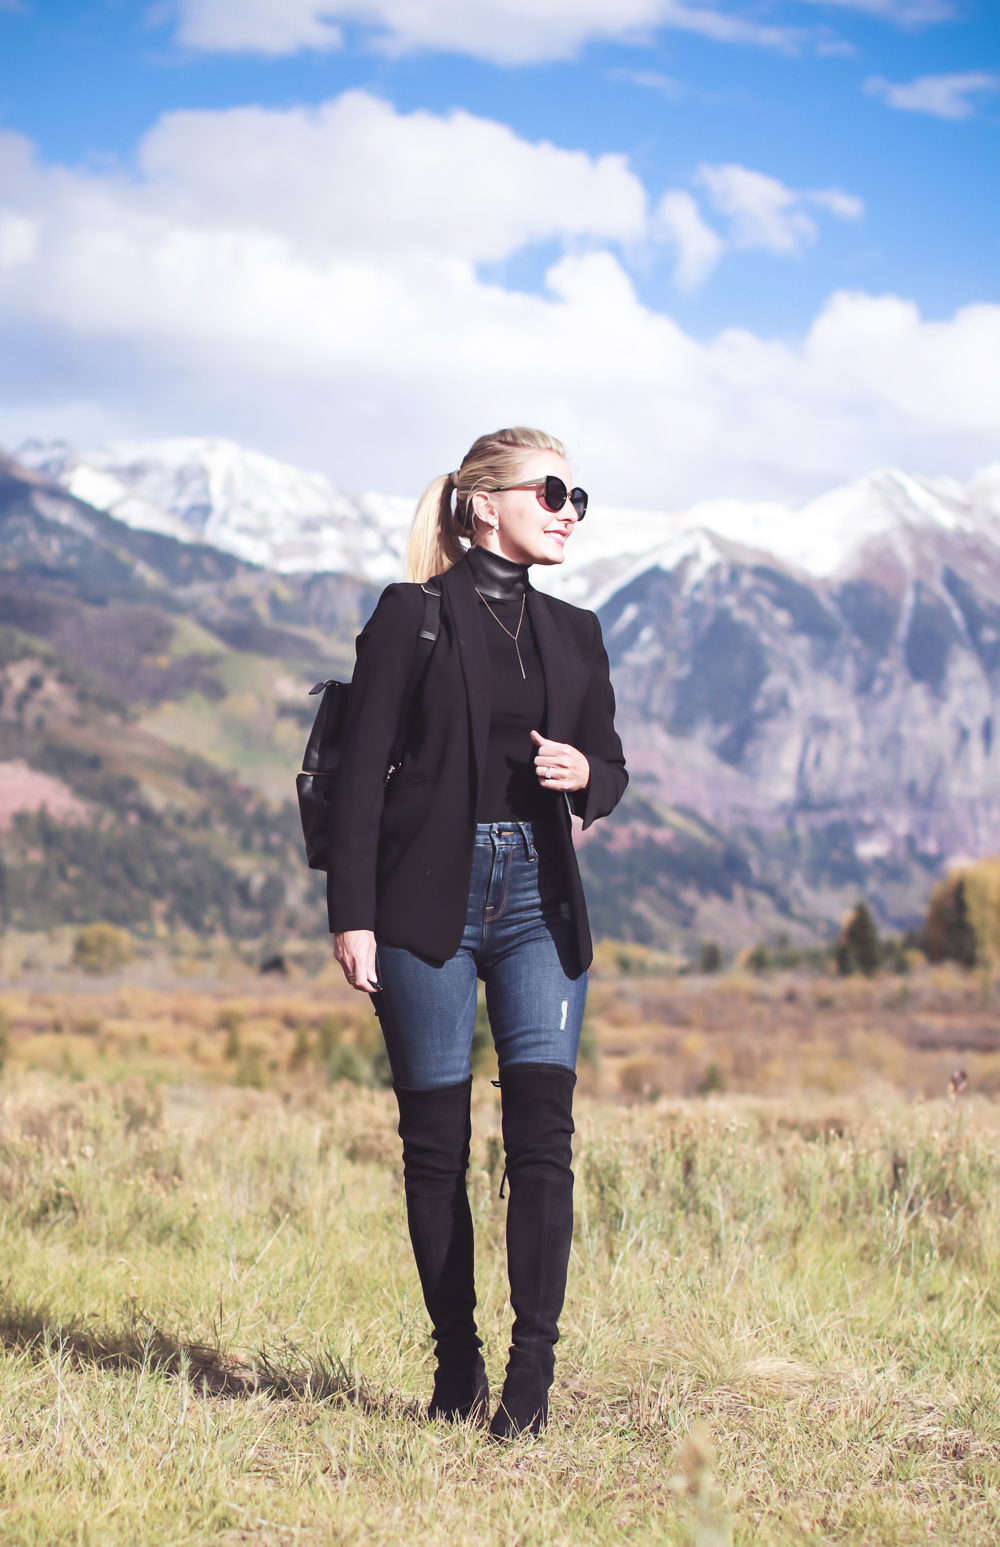 Tall Boots, over the knee boots, how to wear otk boots if you are tall or petite, featuring fashion blogger, Erin Busbee of Busbee Style in Telluride, Colorado, wearing Stuart Weitzman lowland boots 